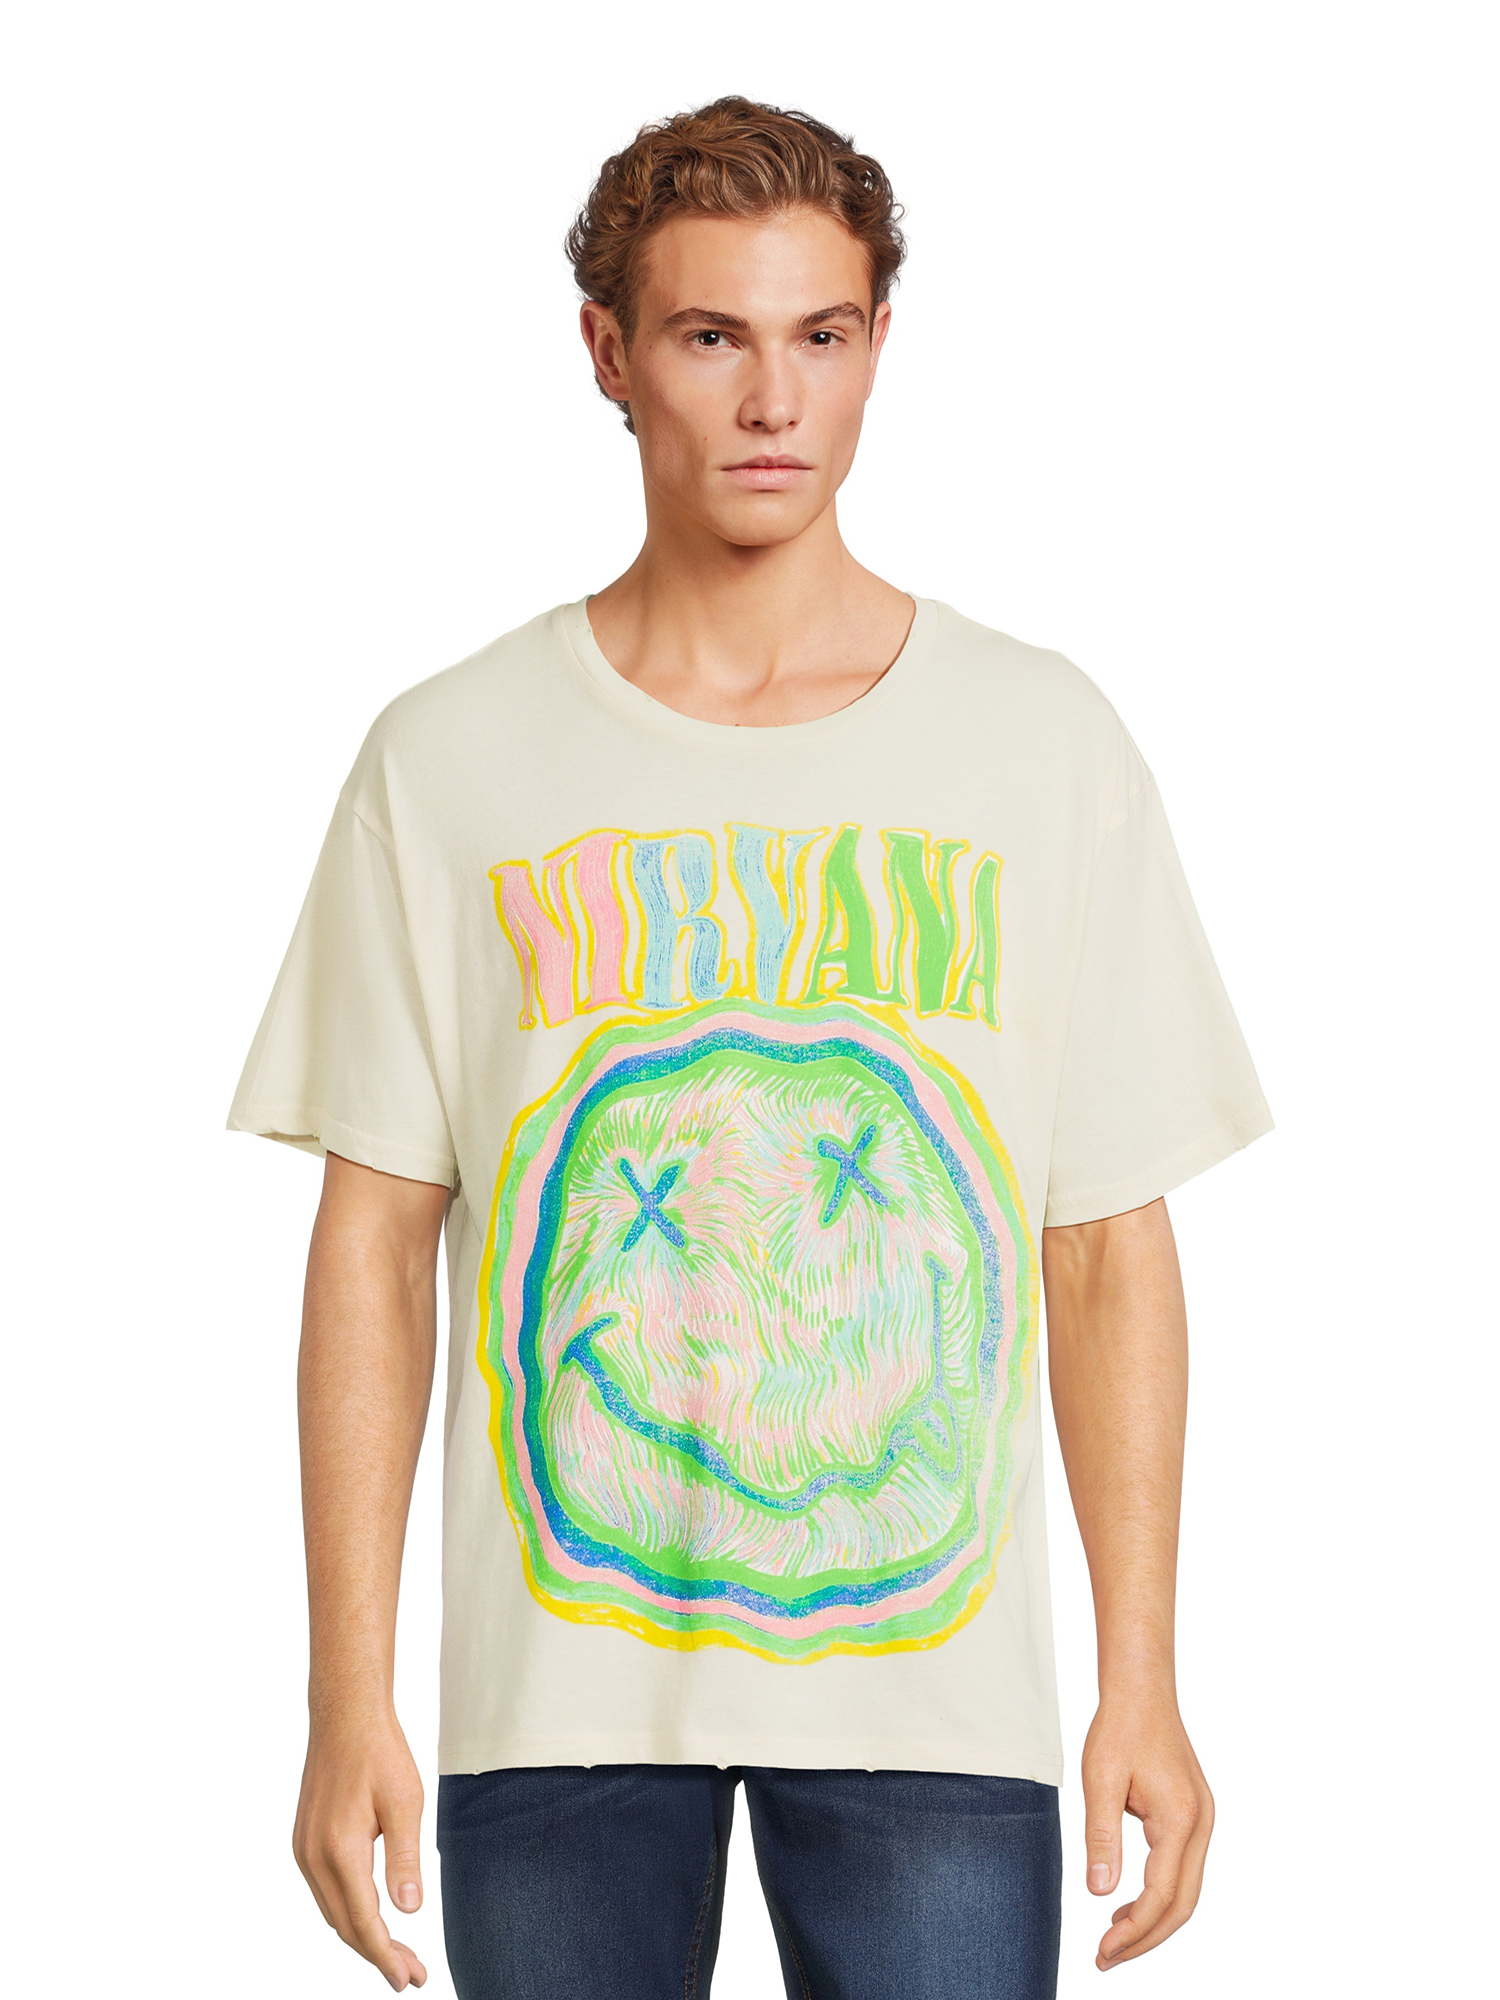 Nirvana Men's Graphic Band Tee with Short Sleeves, Sizes Xs-3xl